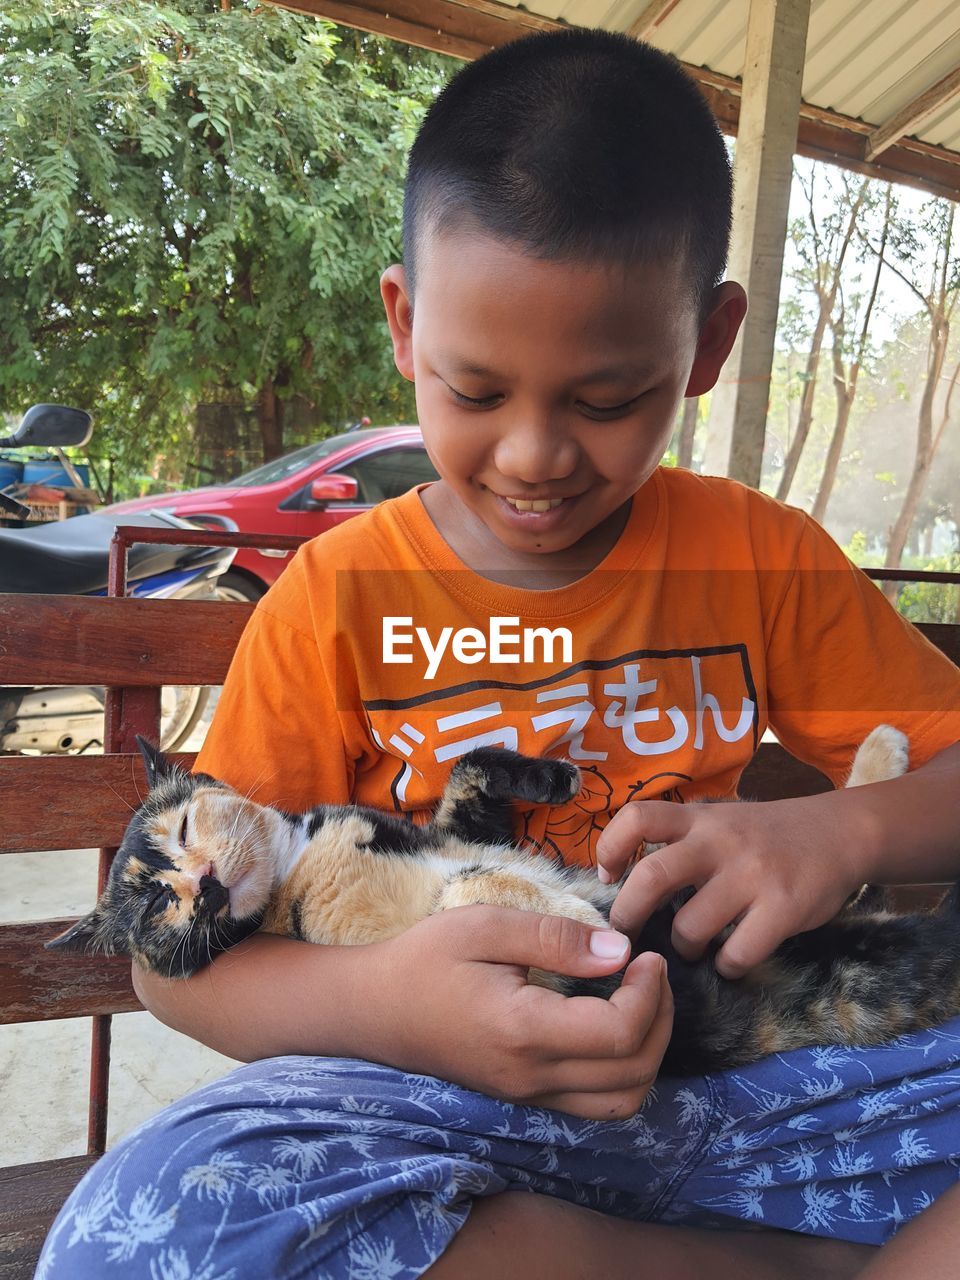 A boy playing with cat